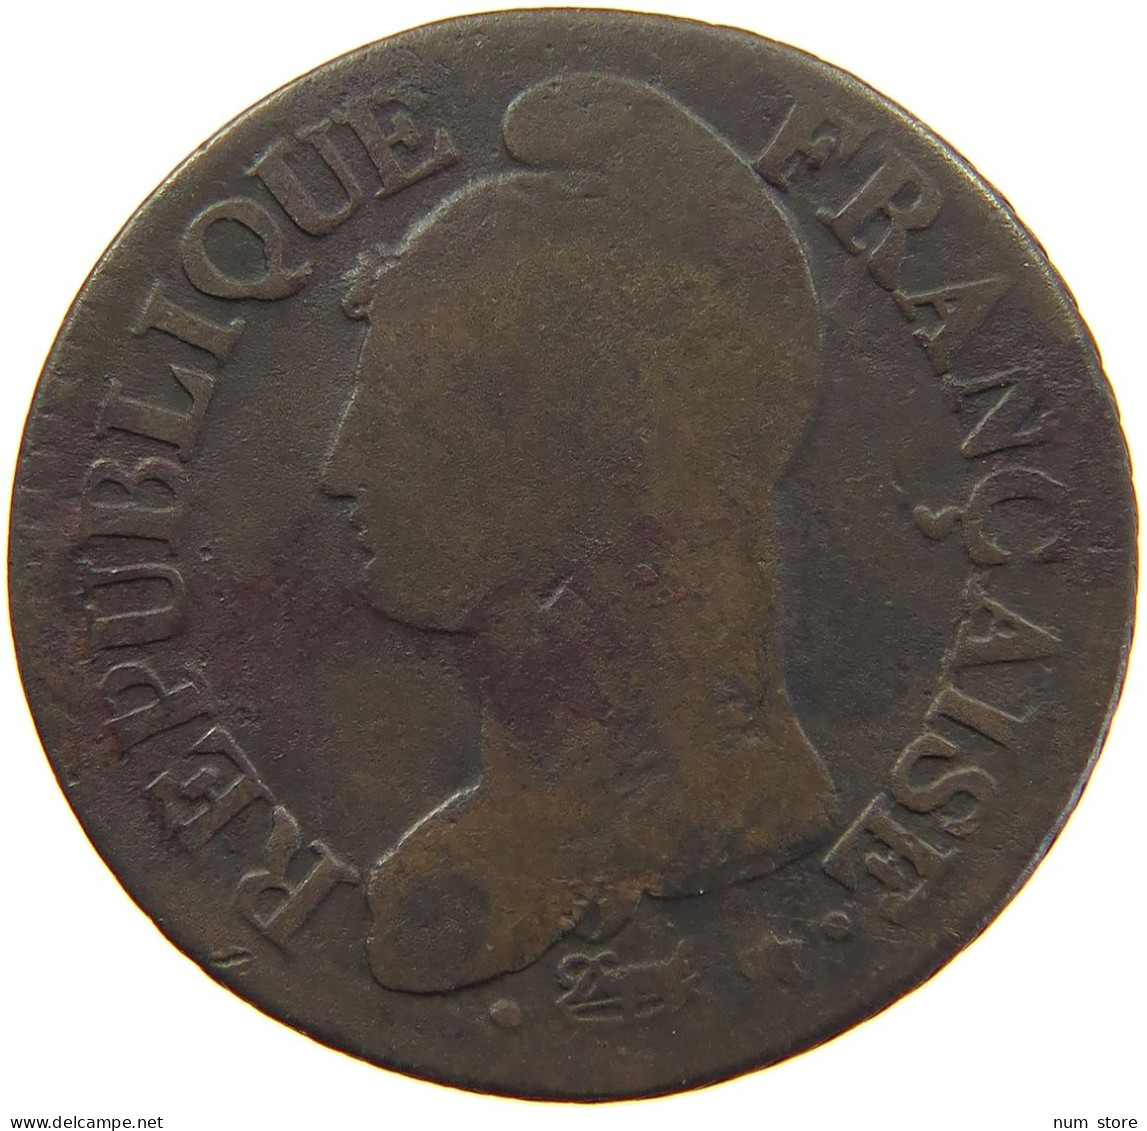 FRANCE 5 CENTIMES AN 7 W  #c061 0107 - 5 Centimes